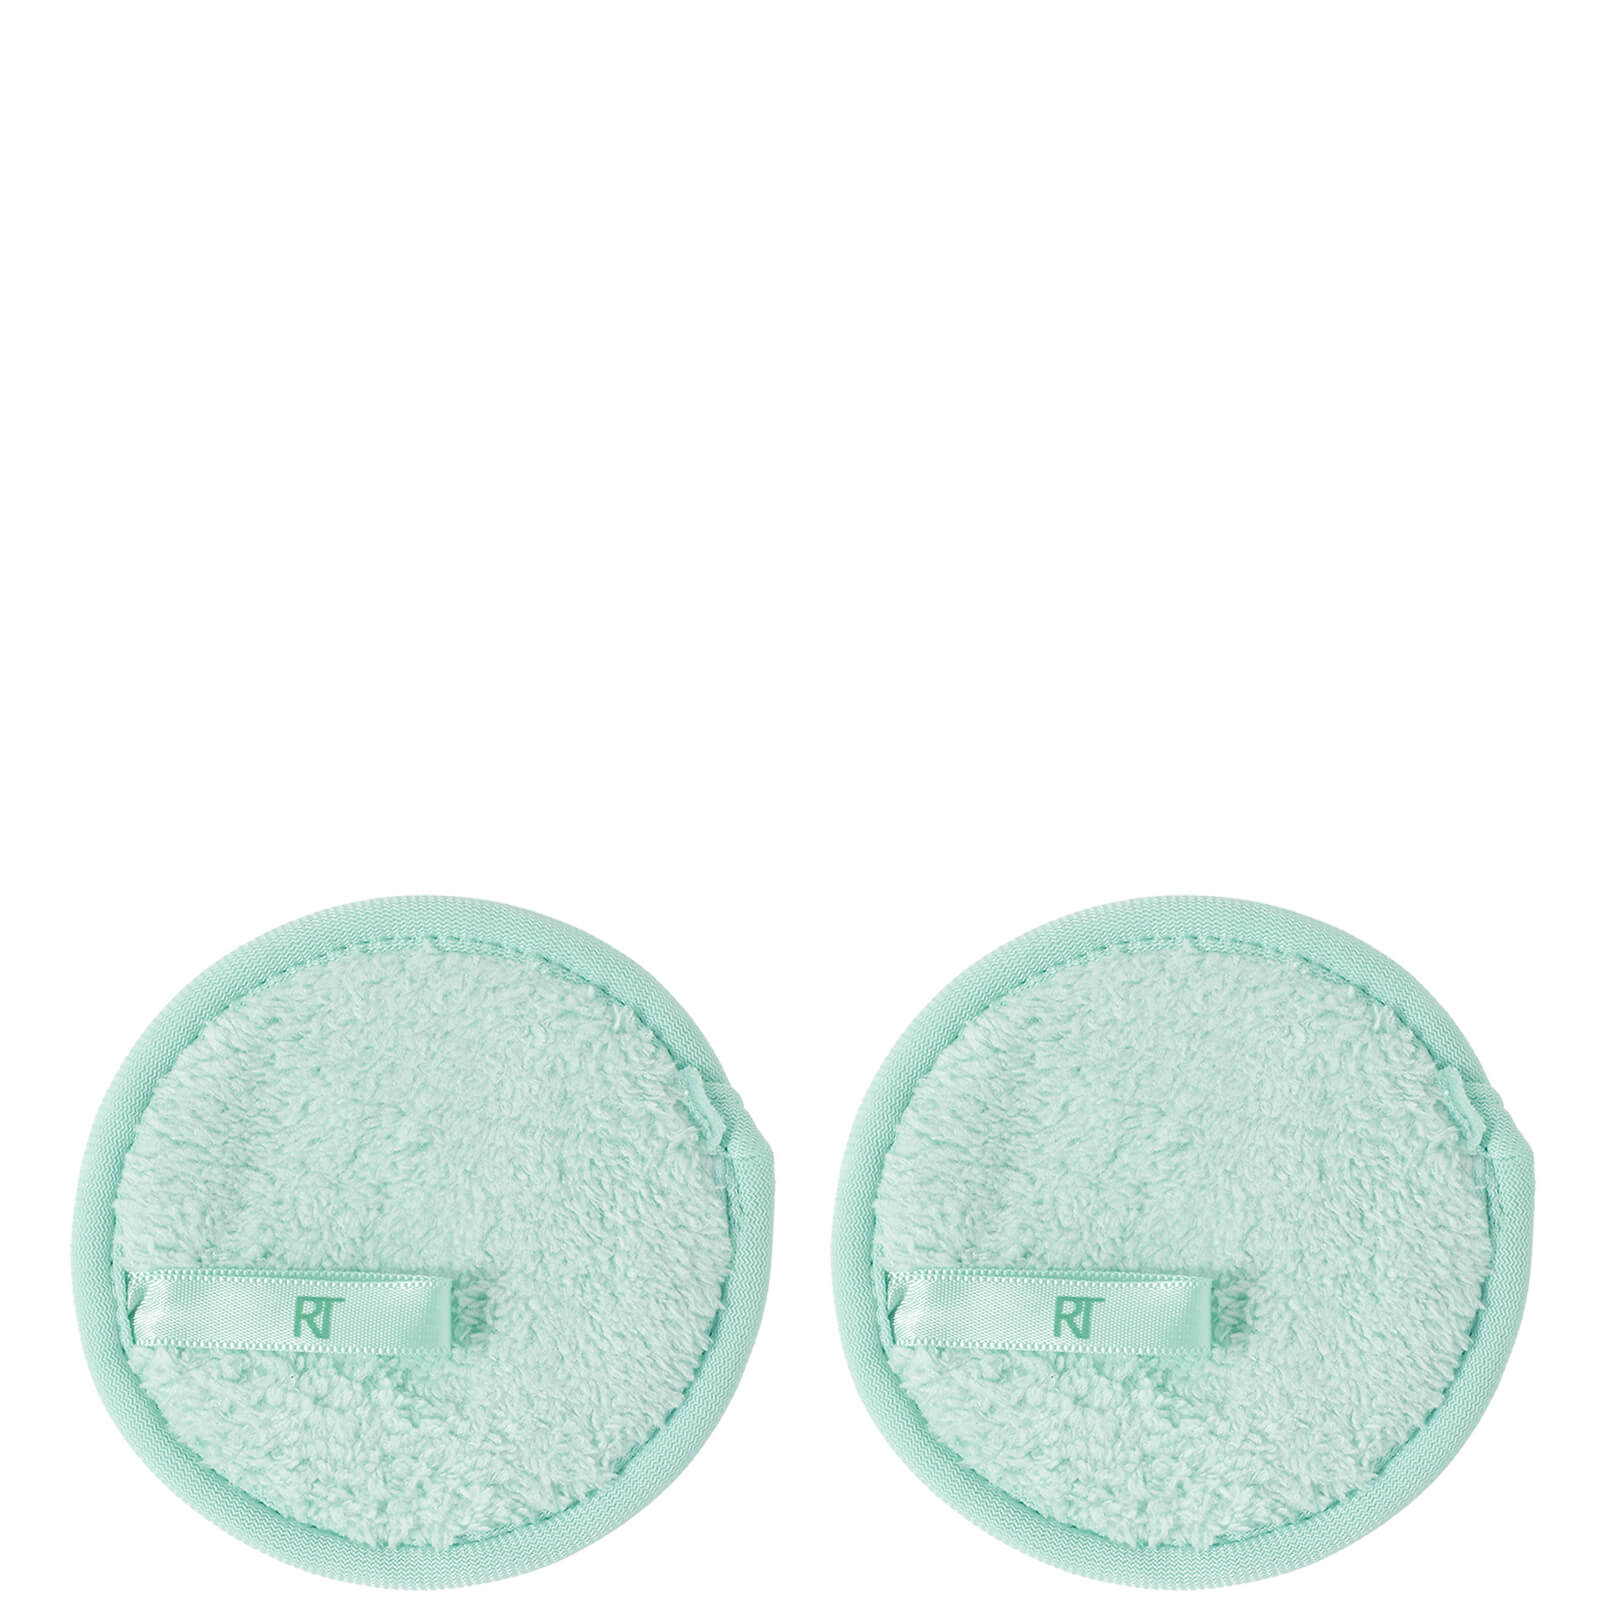 Real Techniques Makeup Remover Pads